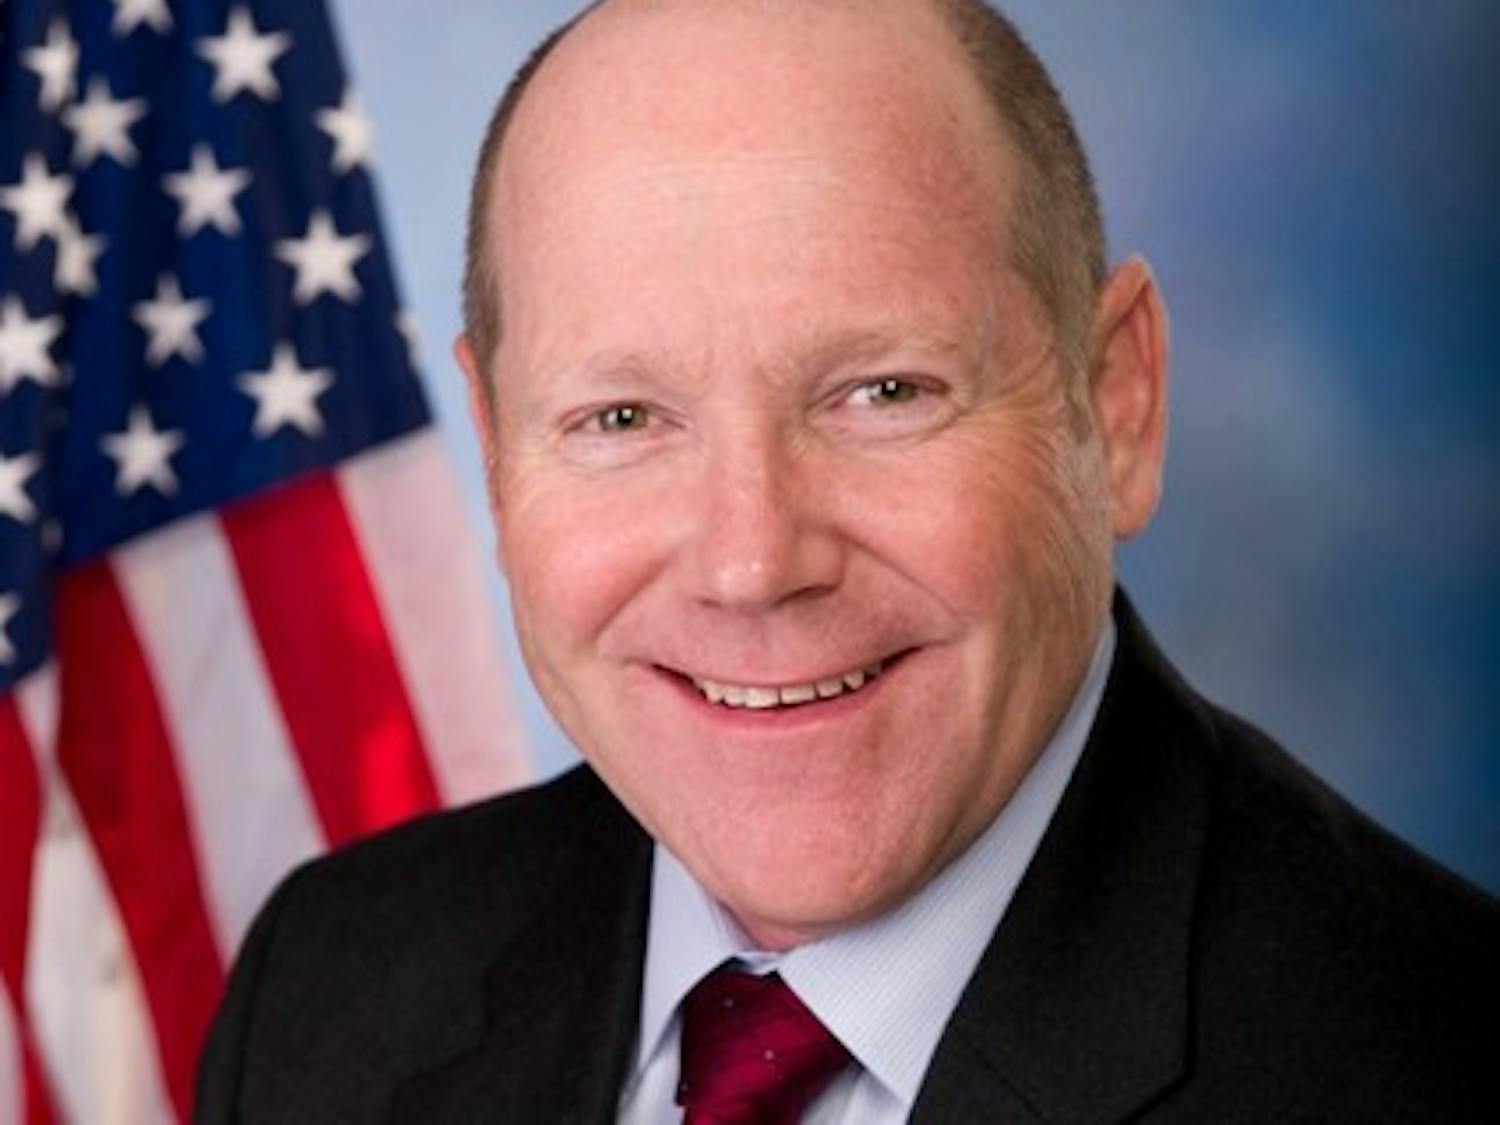 U.S. Rep. Reid Ribble, R-Wis., announced Sunday he will not seek re-election, creating the question among state and local politicians of who will replace him.